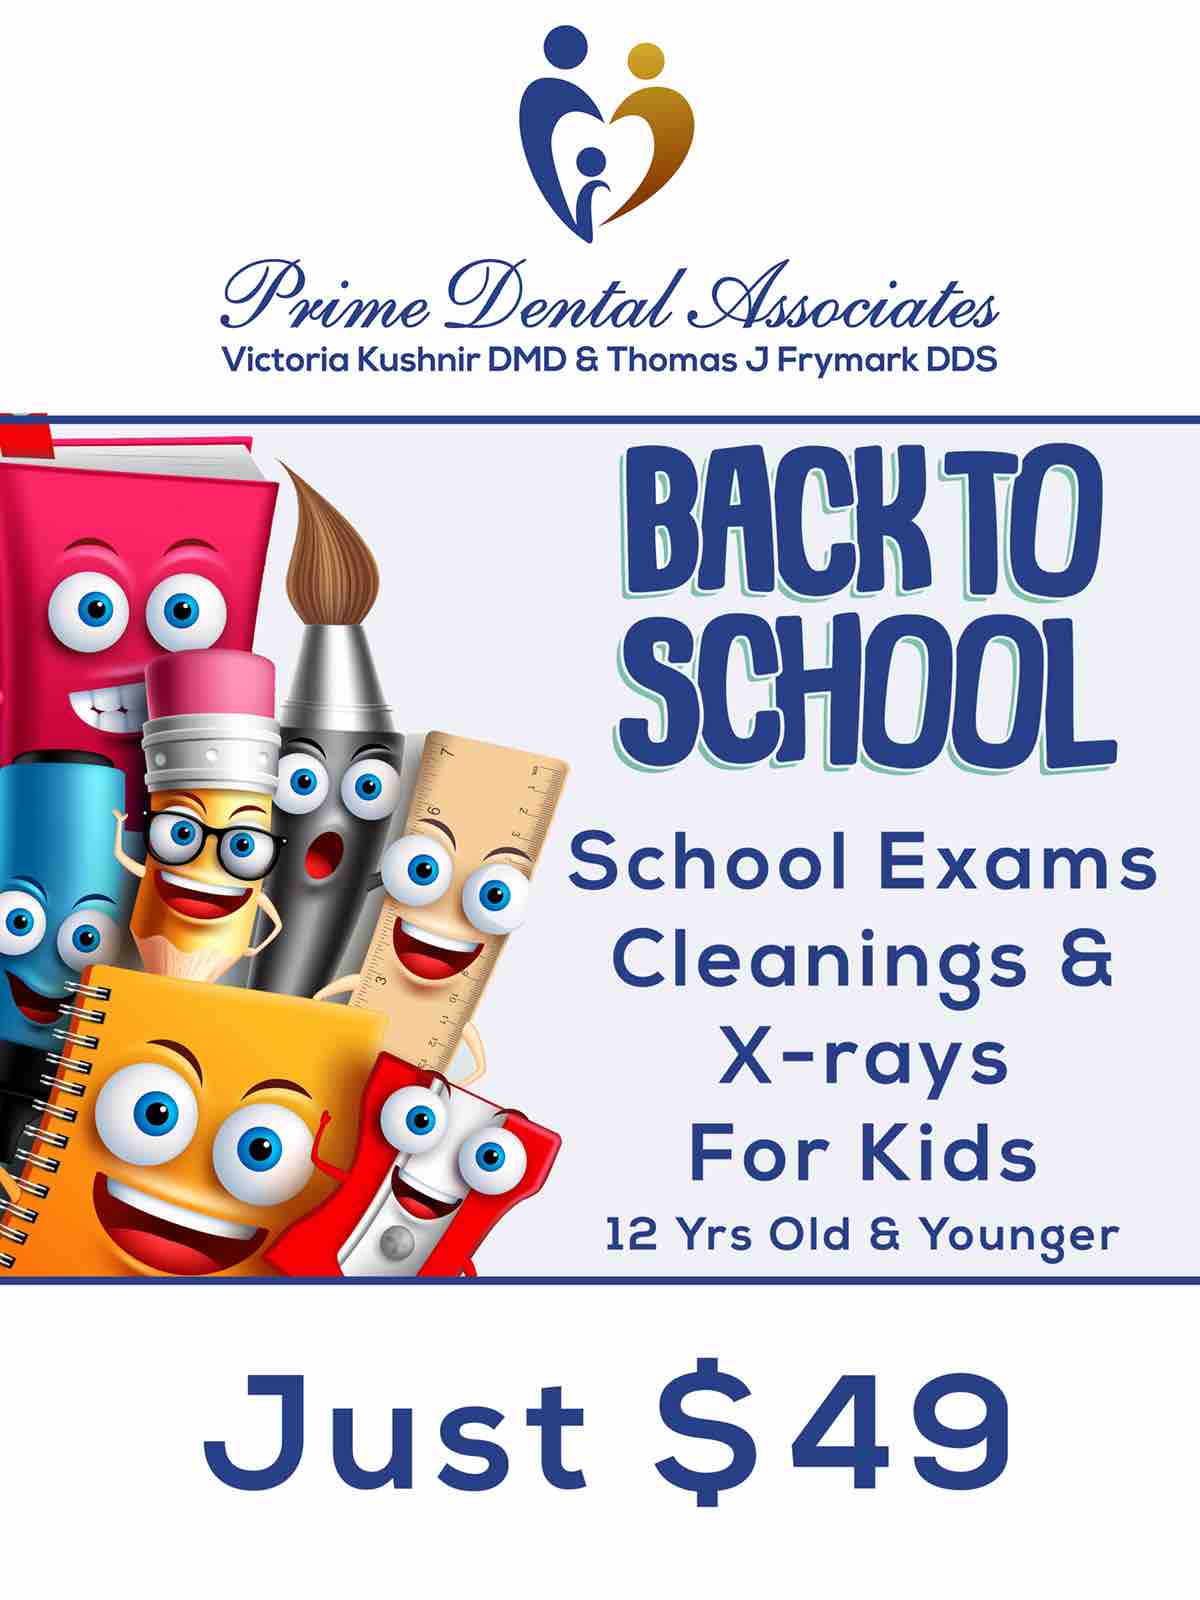 Dental Coupon - Back to school